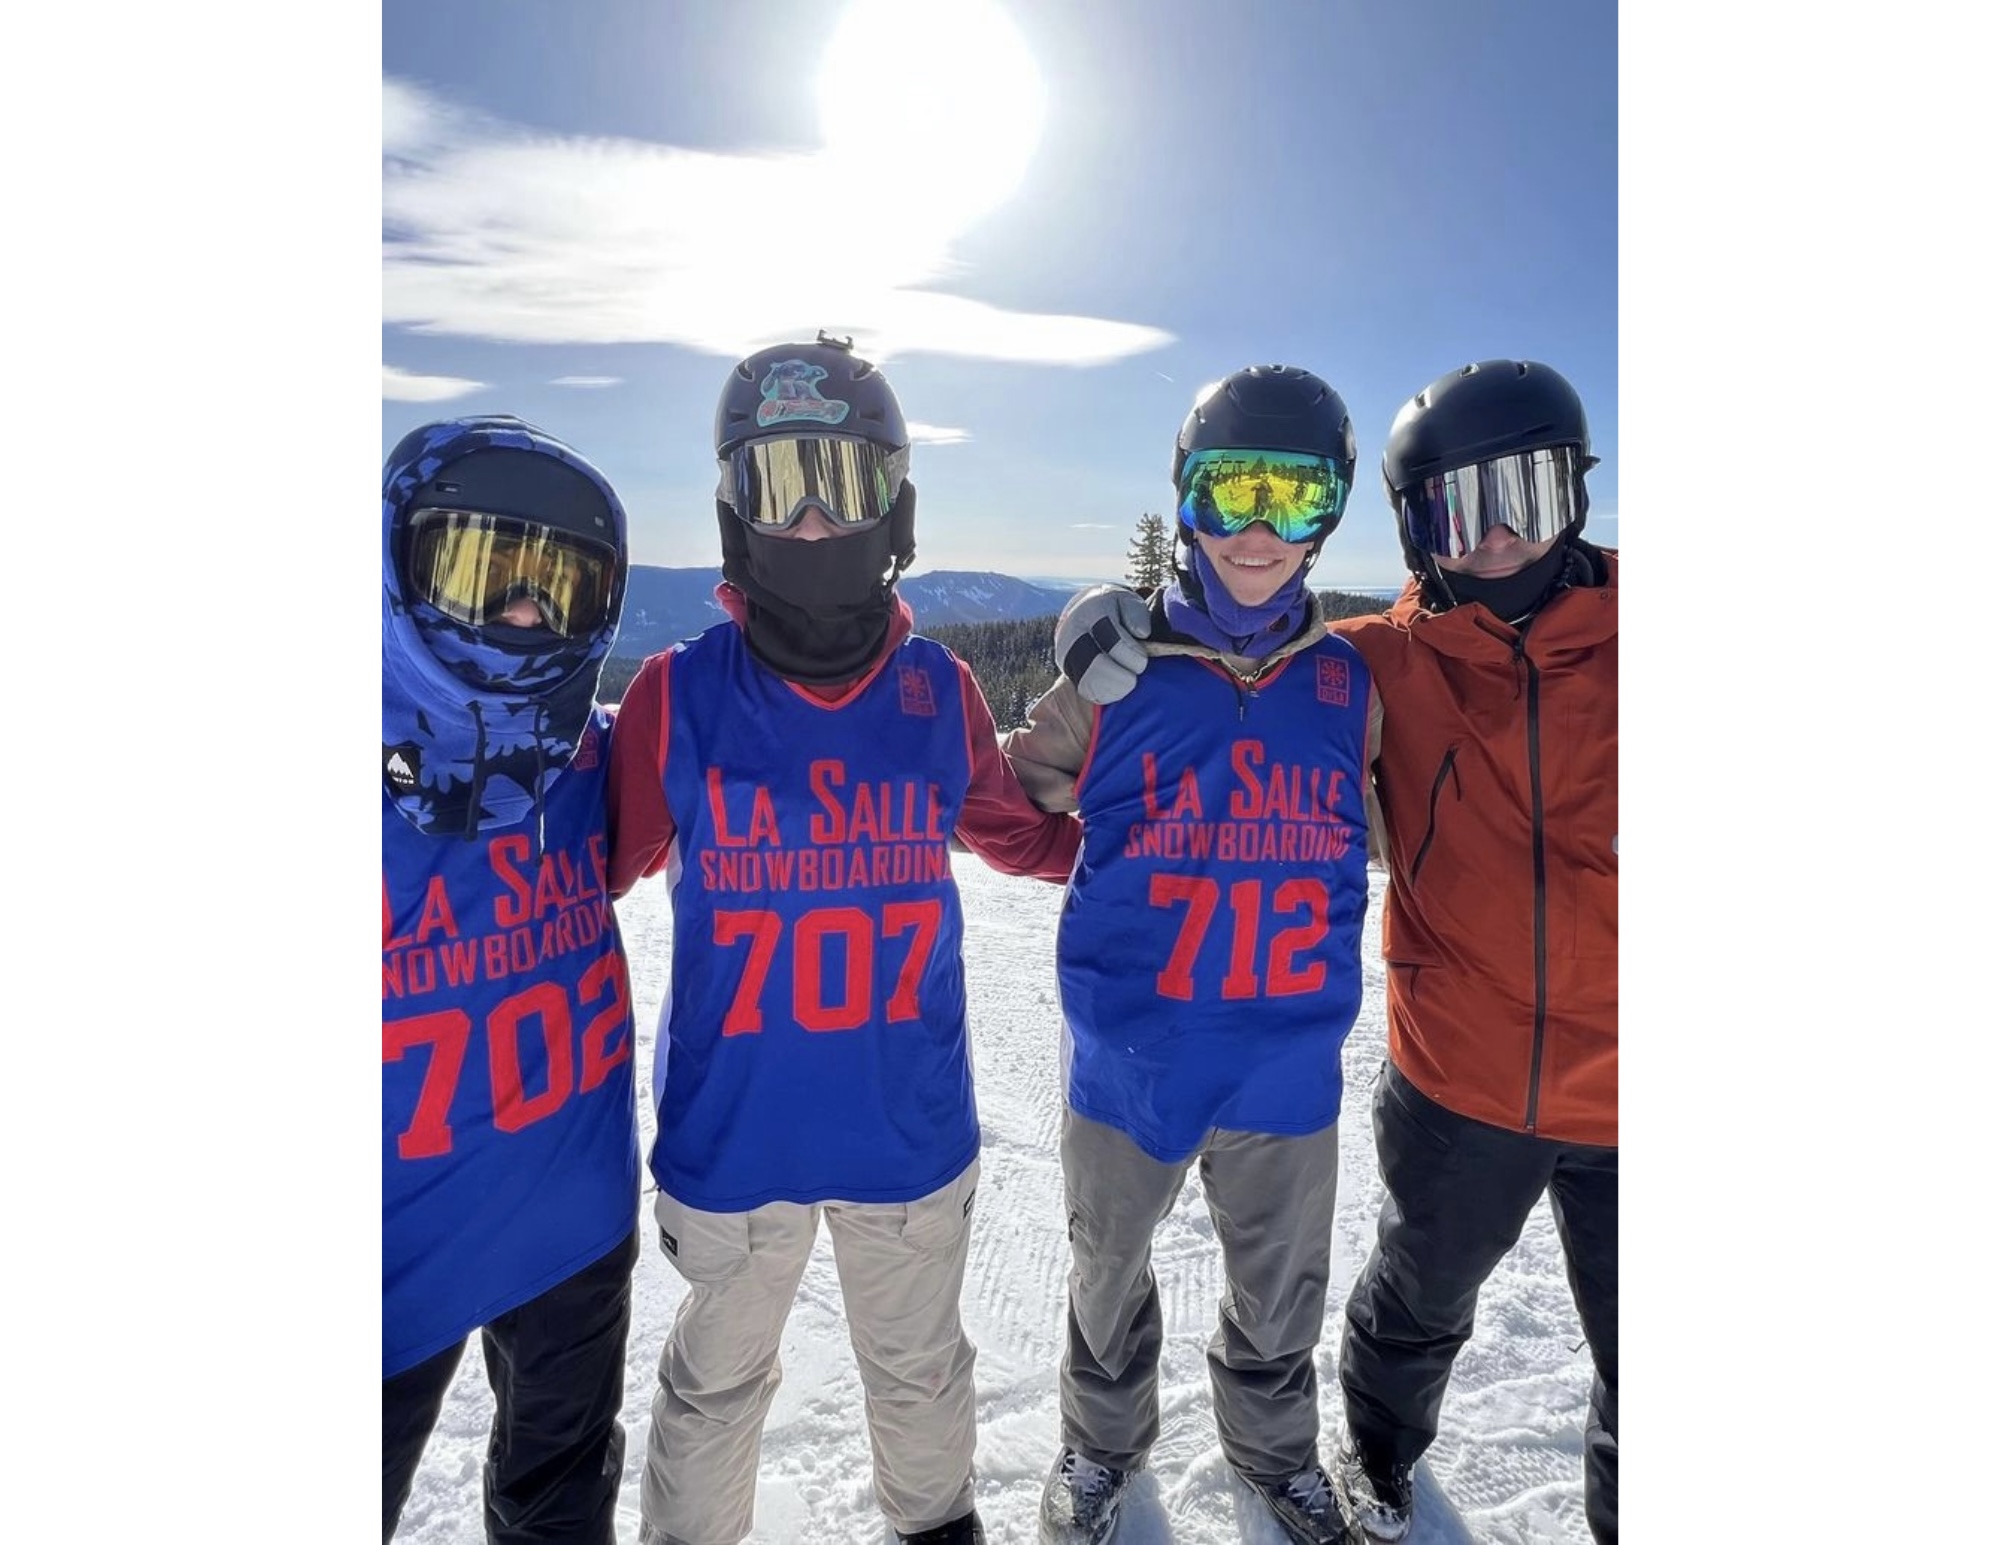 The snowboard team managed to once again qualify for the state tournament.